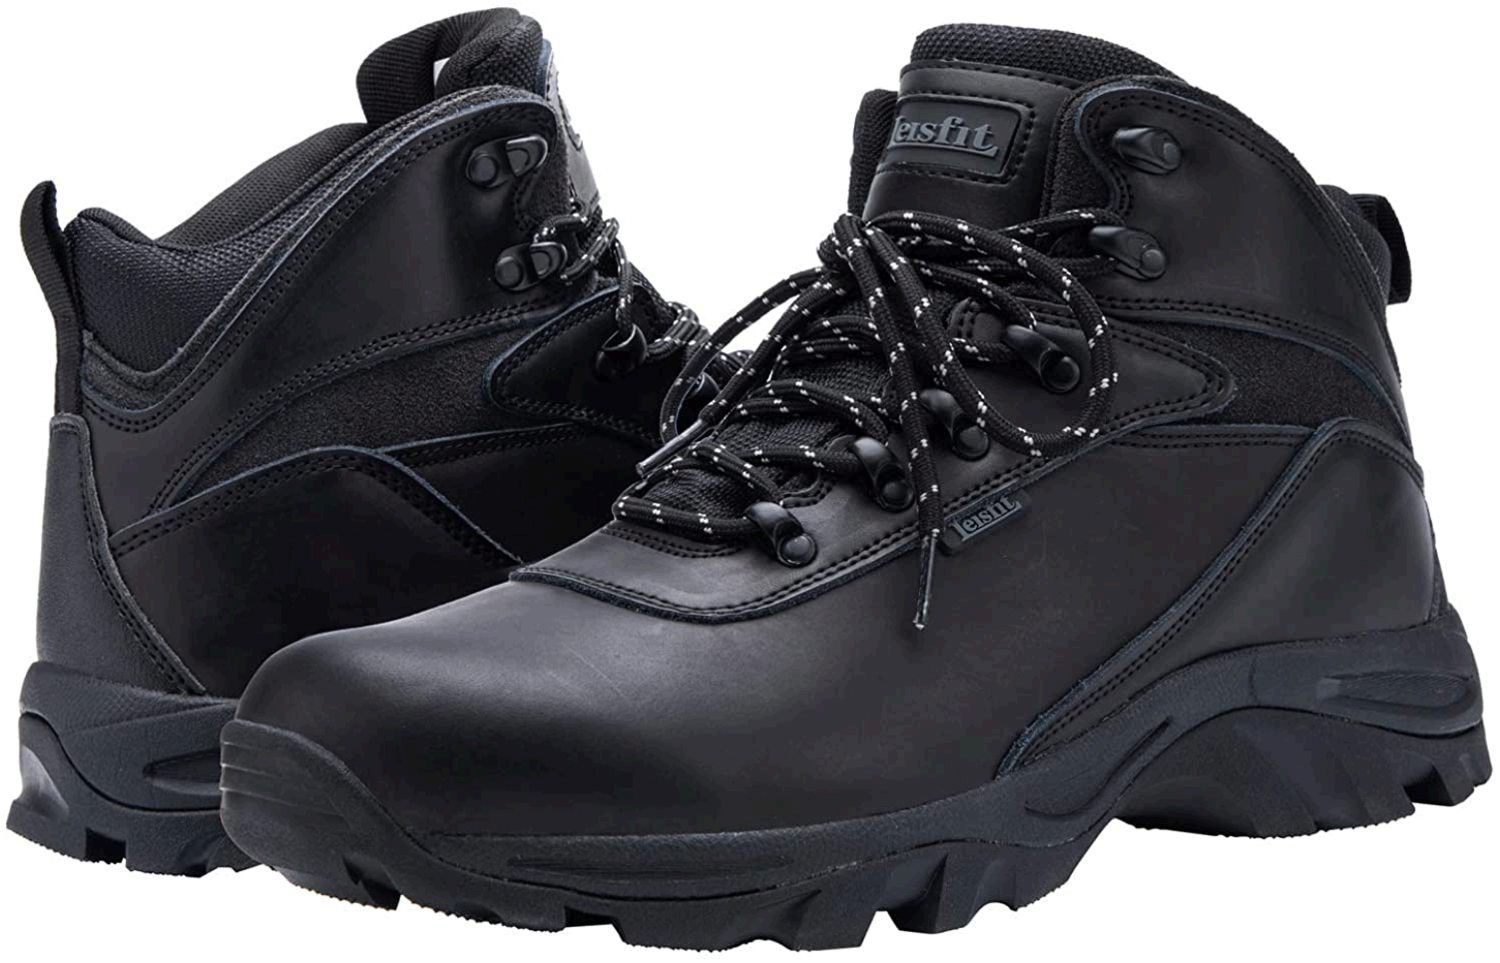 Leisfit Men's Outdoor Waterproof Hiking Boots Insulated Boots, Black ...